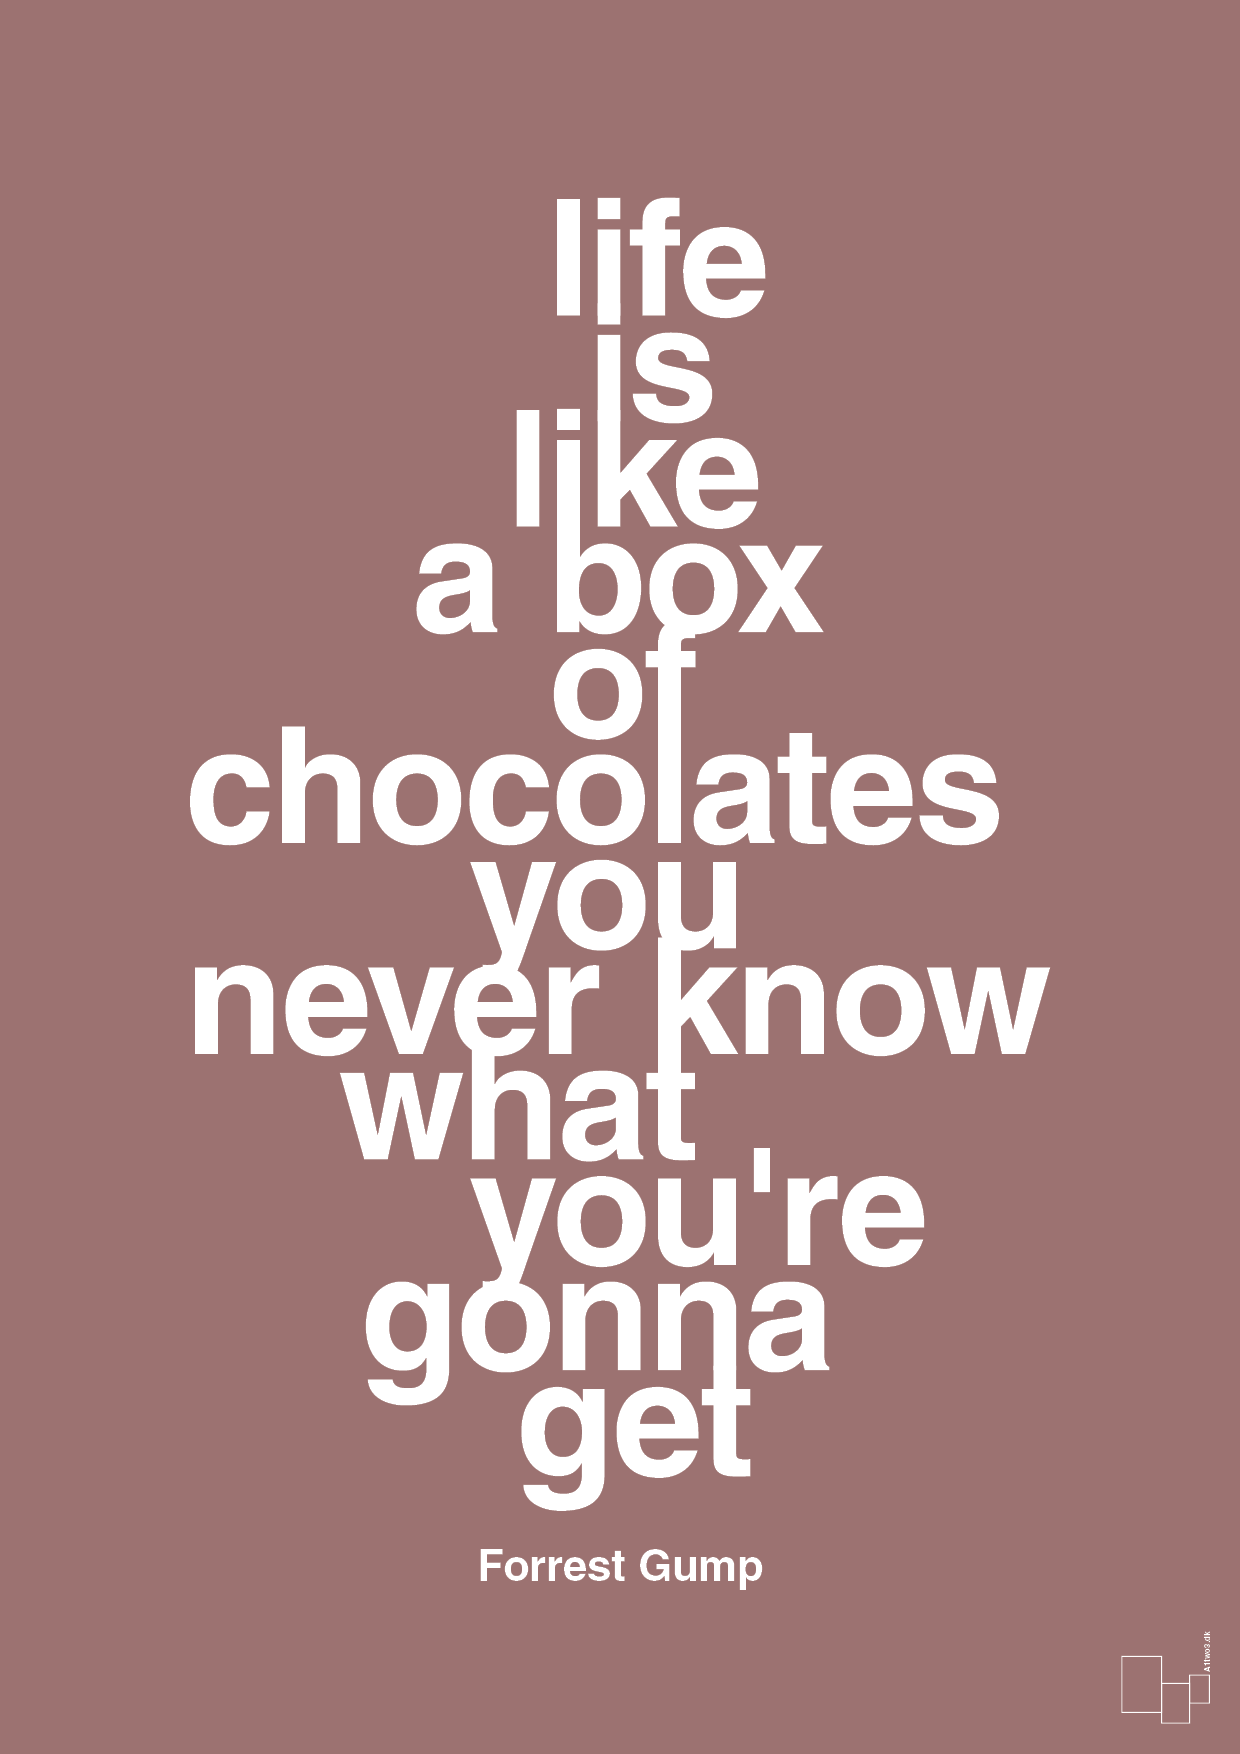 life is like a box of chocolates you never know what you're gonna get - Plakat med Citater i Plum